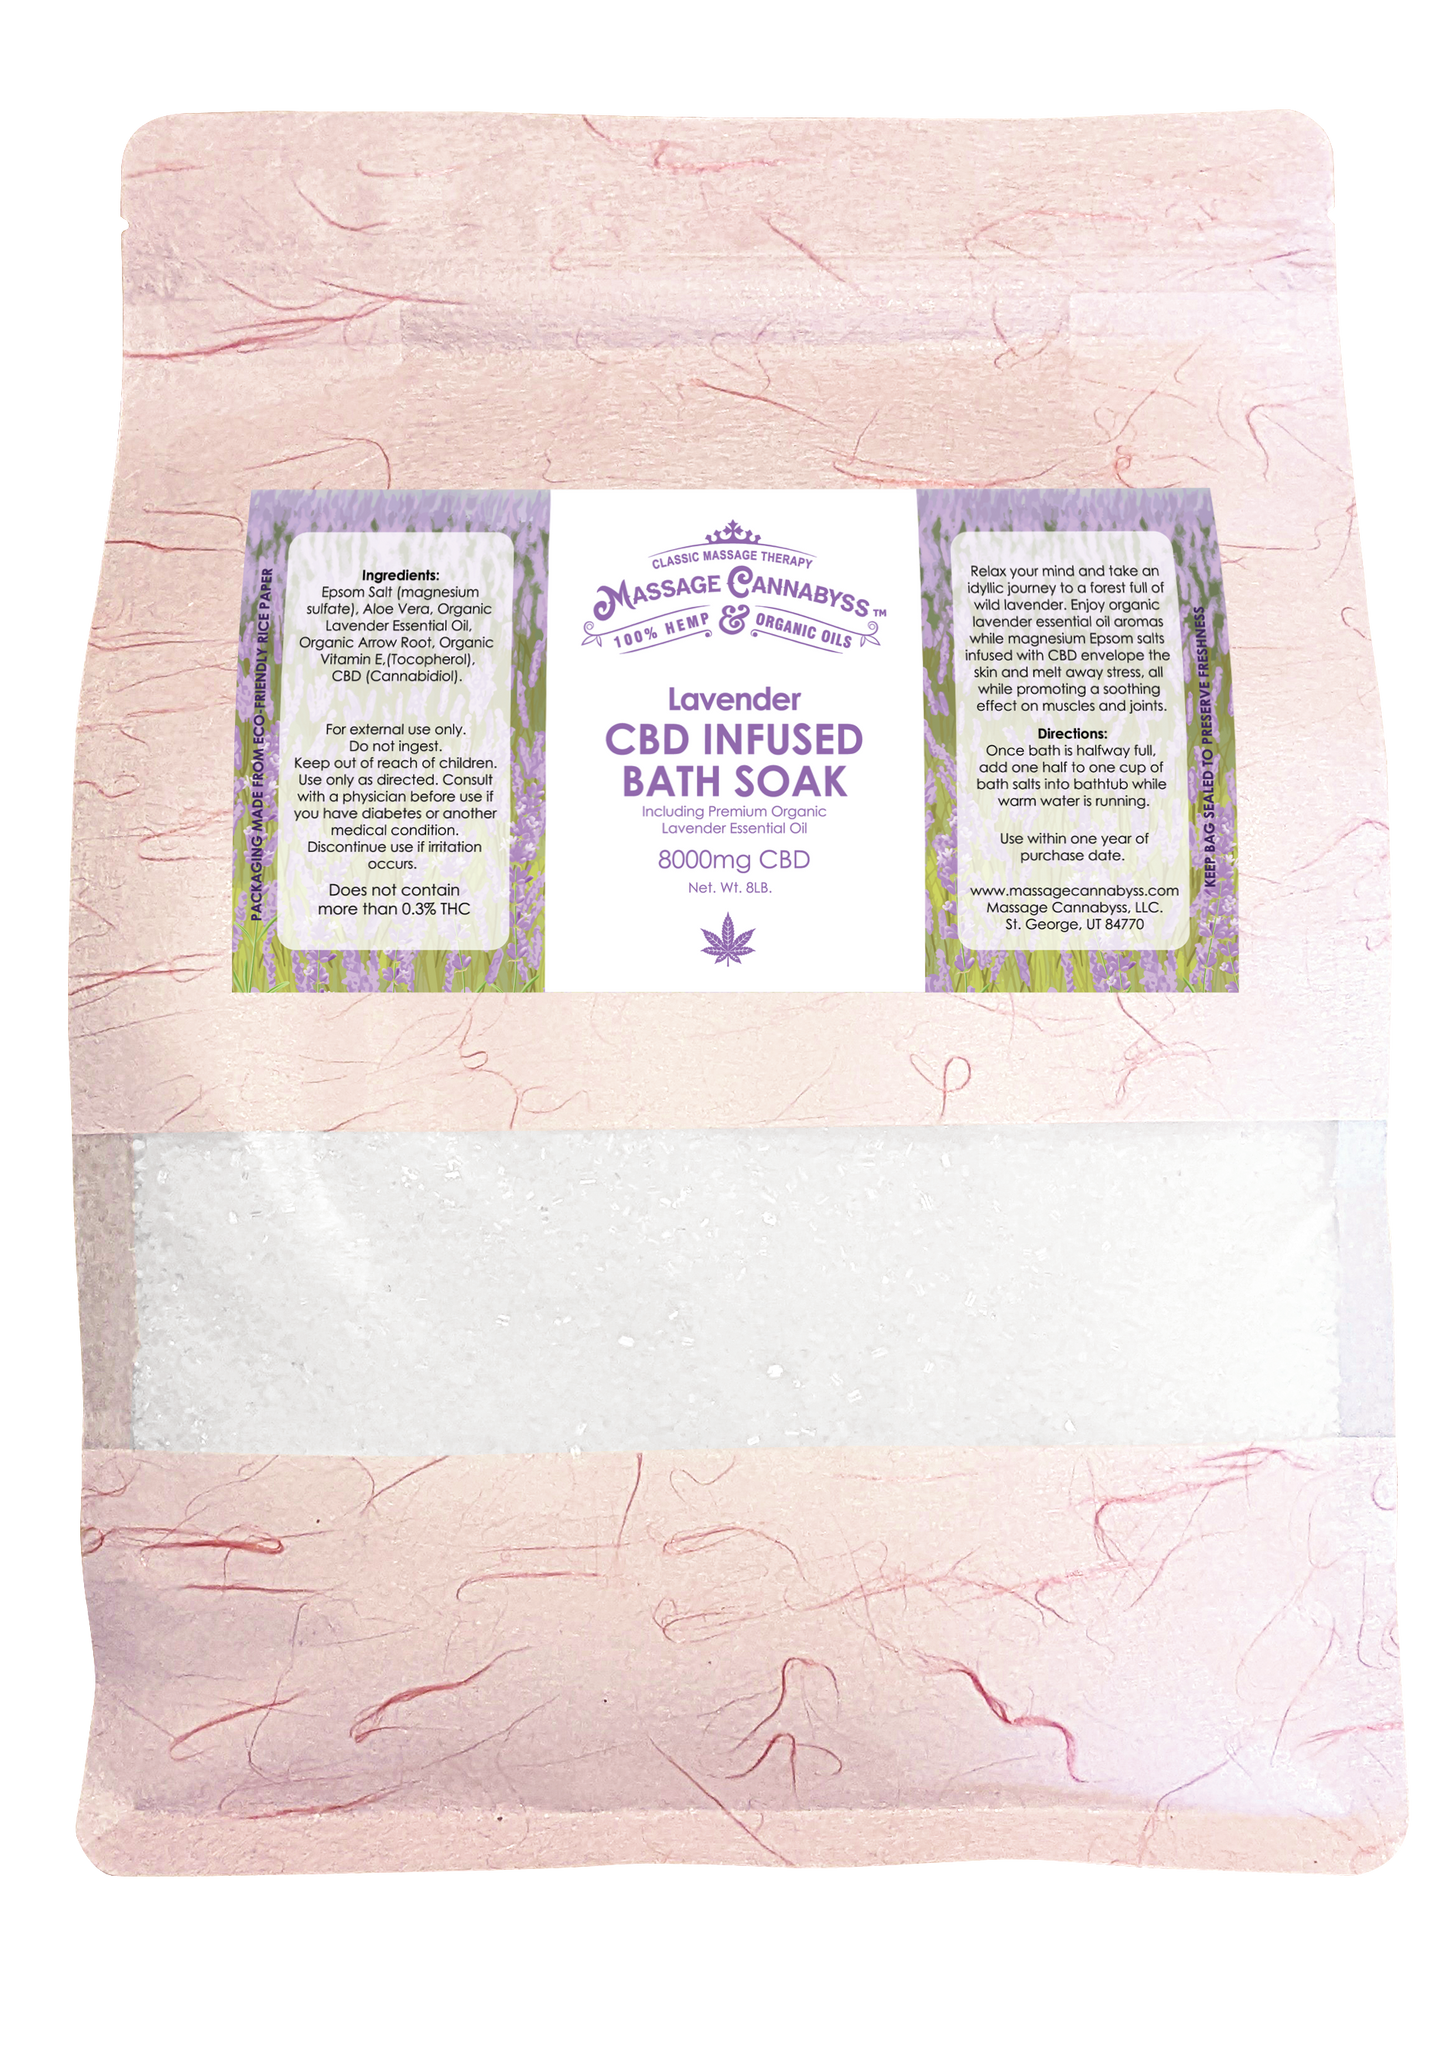 Try Our CBD Infused Bath Salts